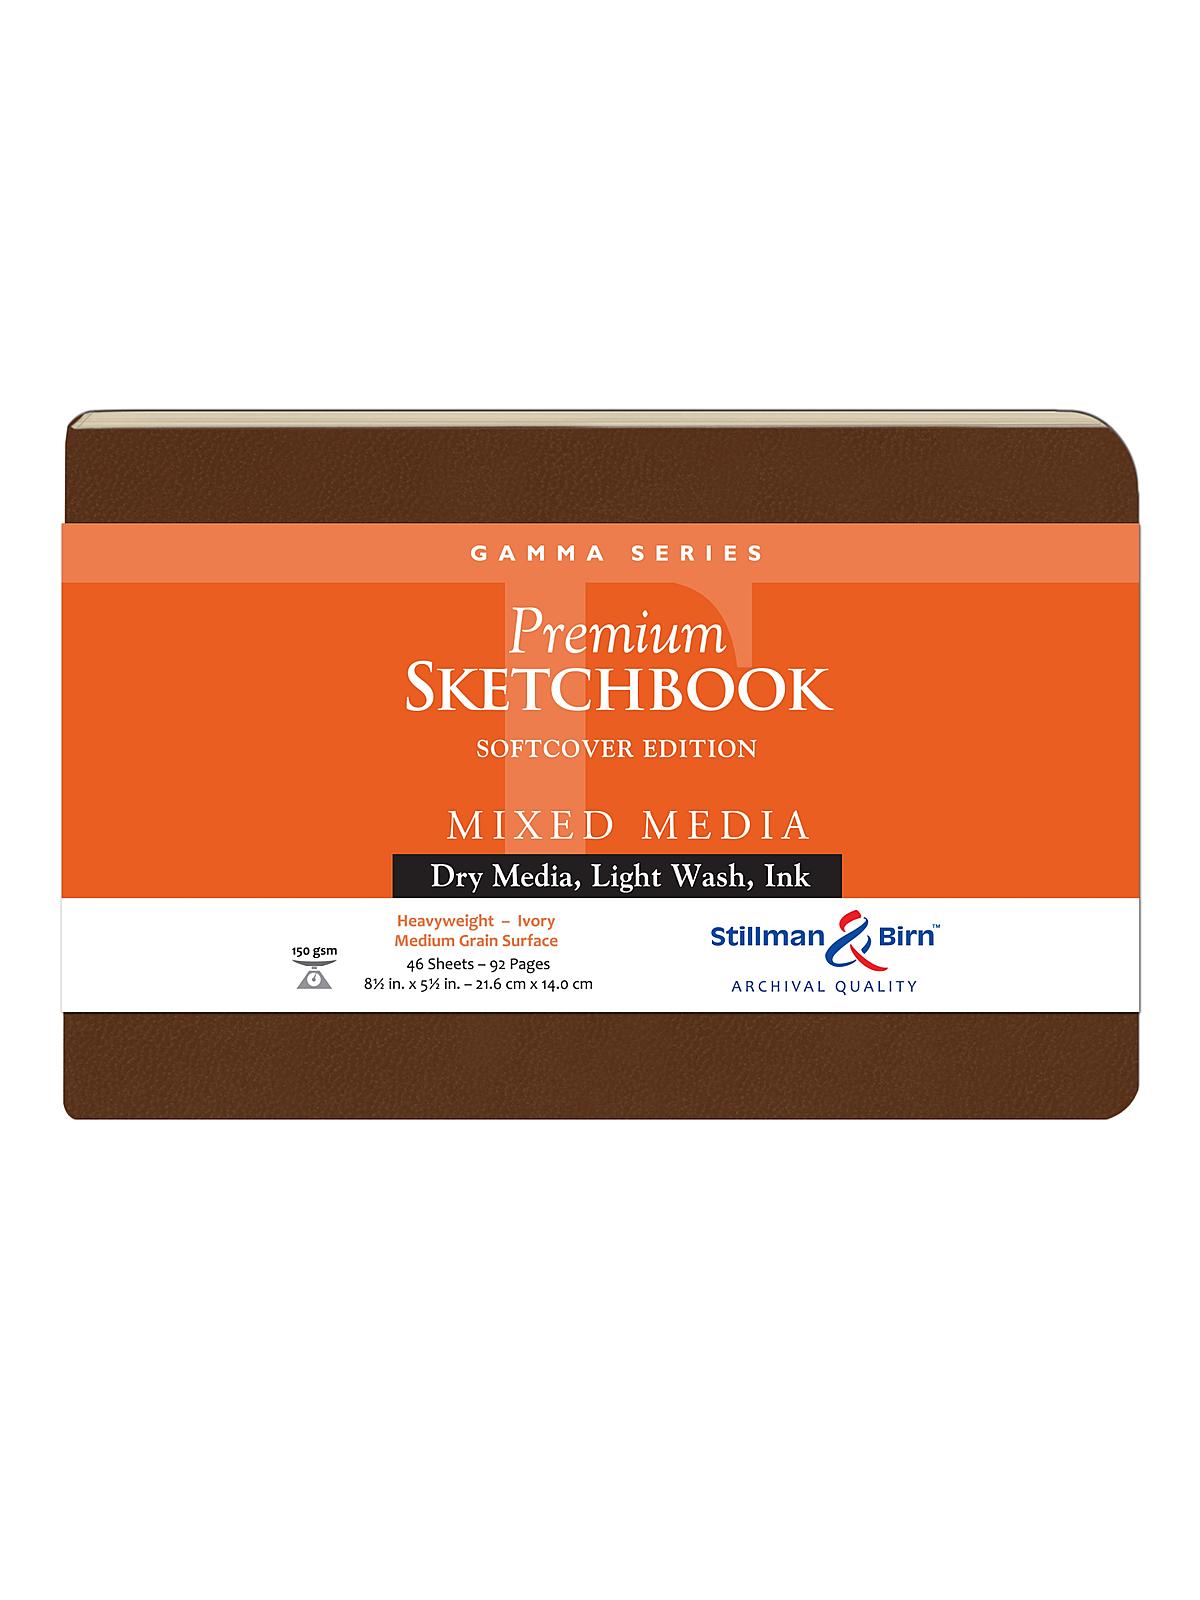 Gamma Series Softcover Sketchbooks 8.5 In. X 5.5 In. Landscape 96 Pages